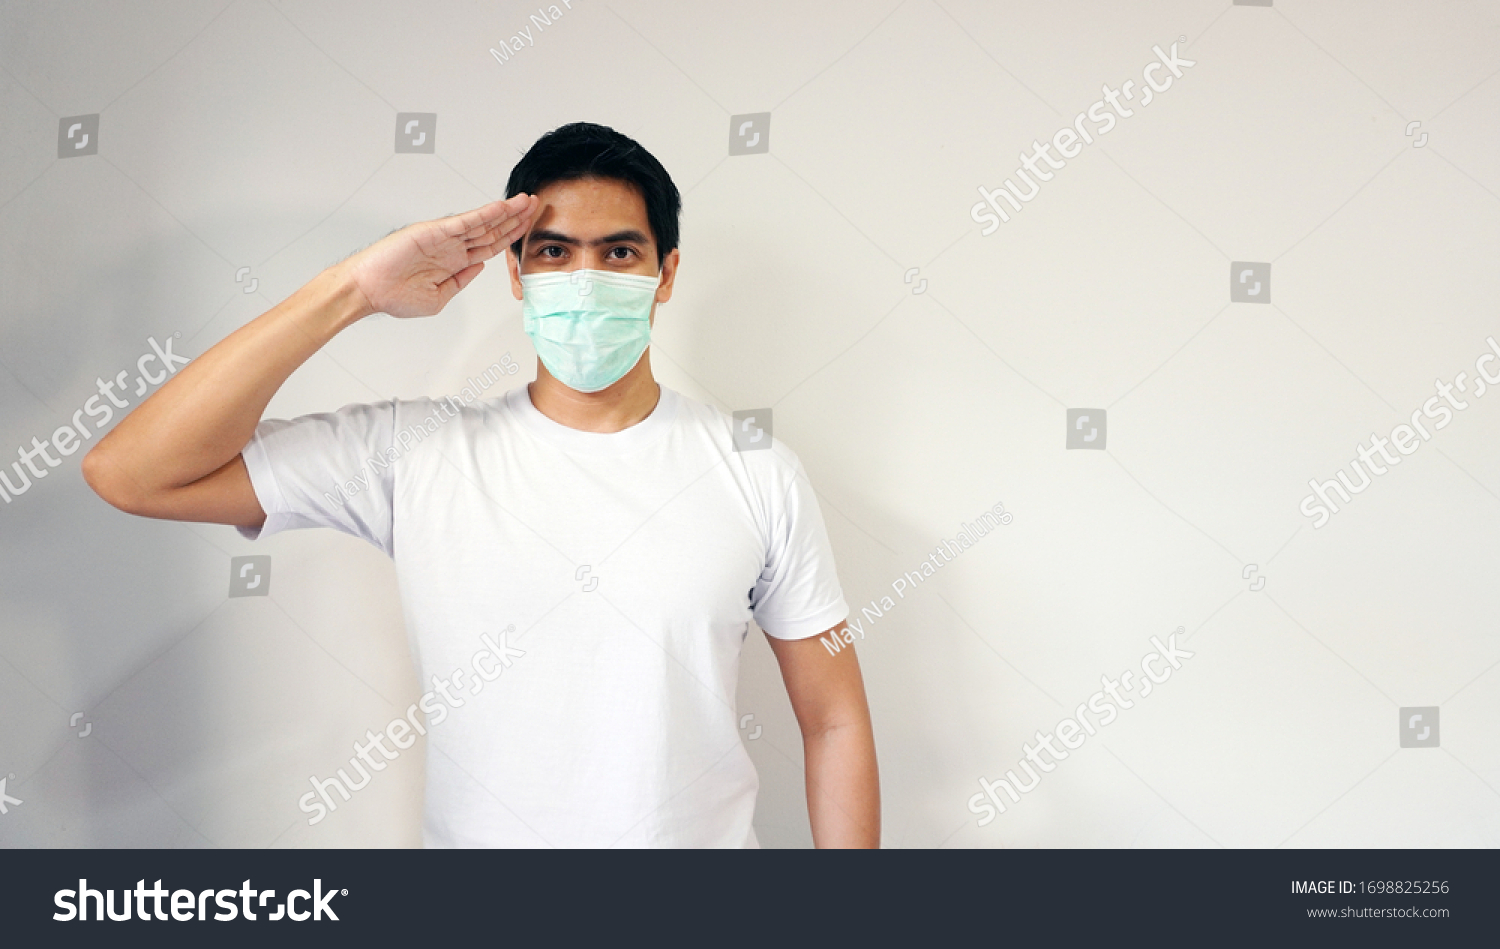 Asian handsome man wearing a medical protective mask act saluting gesture. Concept of showing strong pride protection against pm2.5 and coronavirus covid-19. Isolated on white with copy space #1698825256